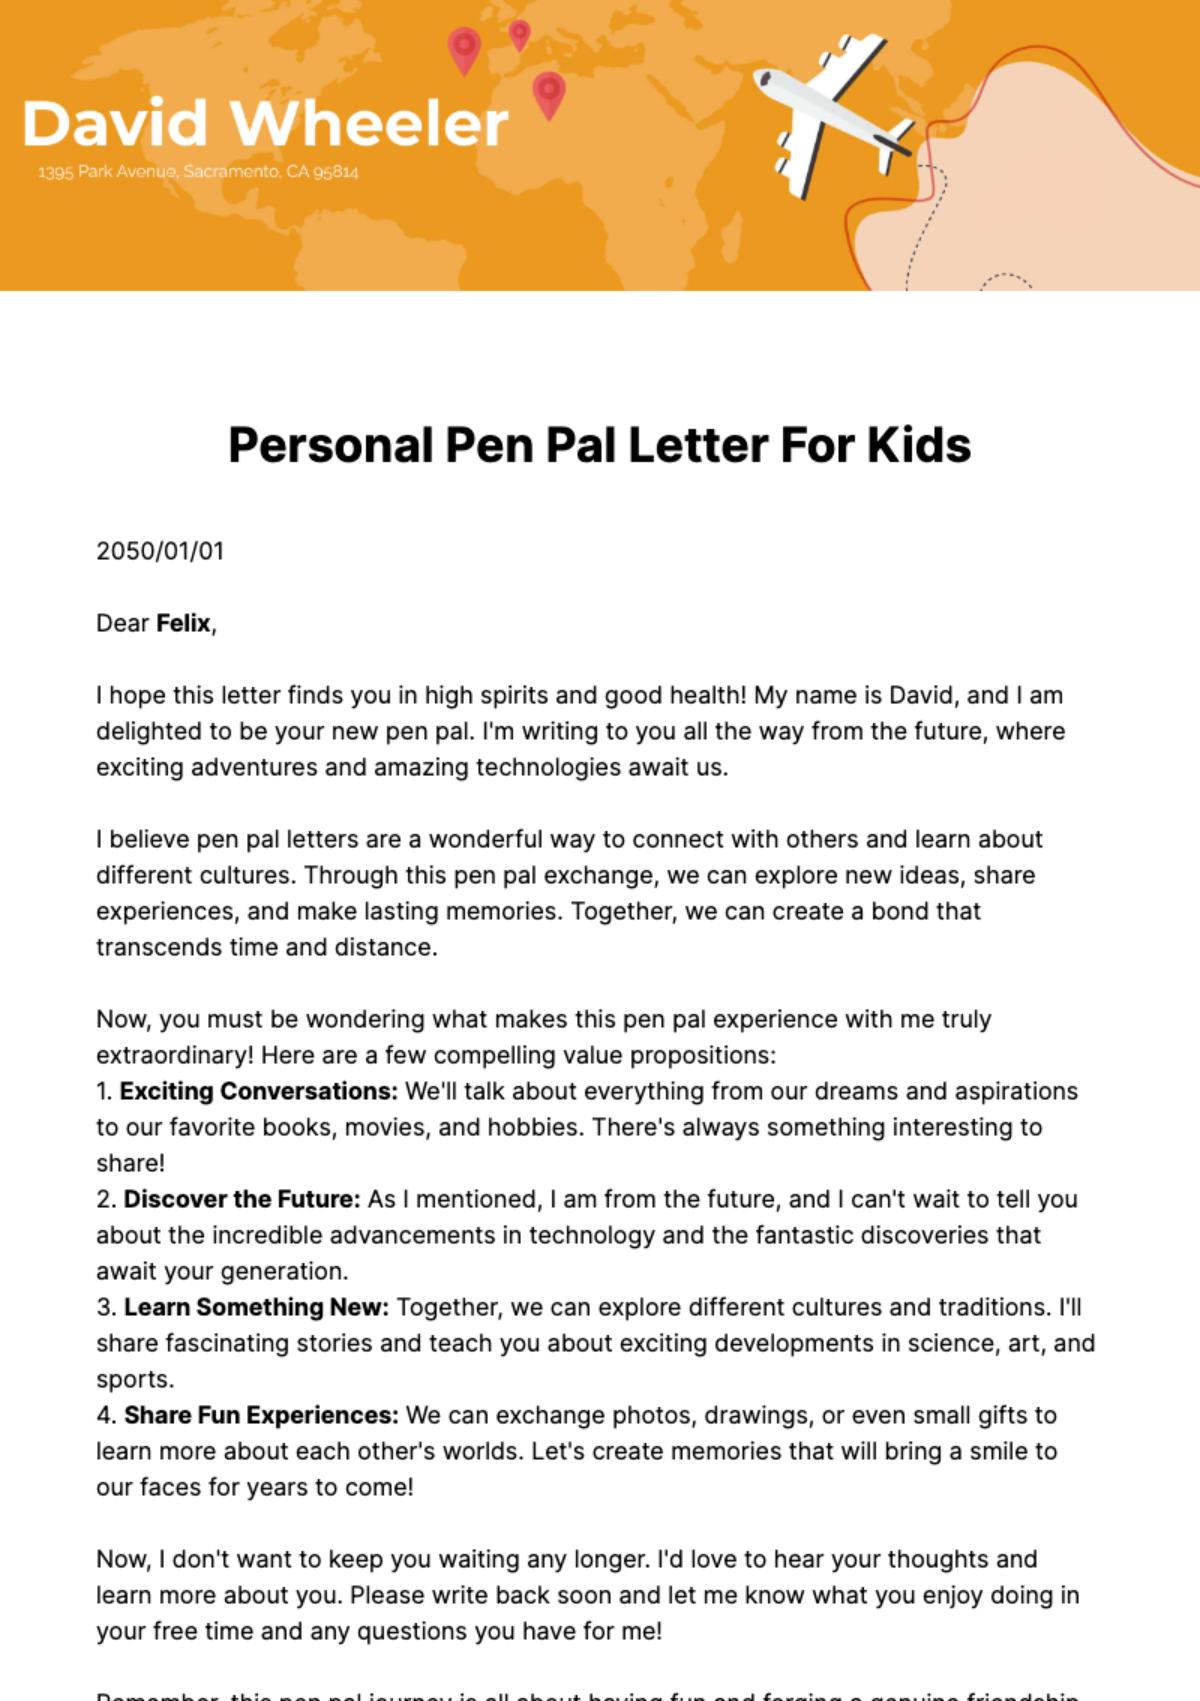 Free Personal Pen Pal Letter for Kids  Template